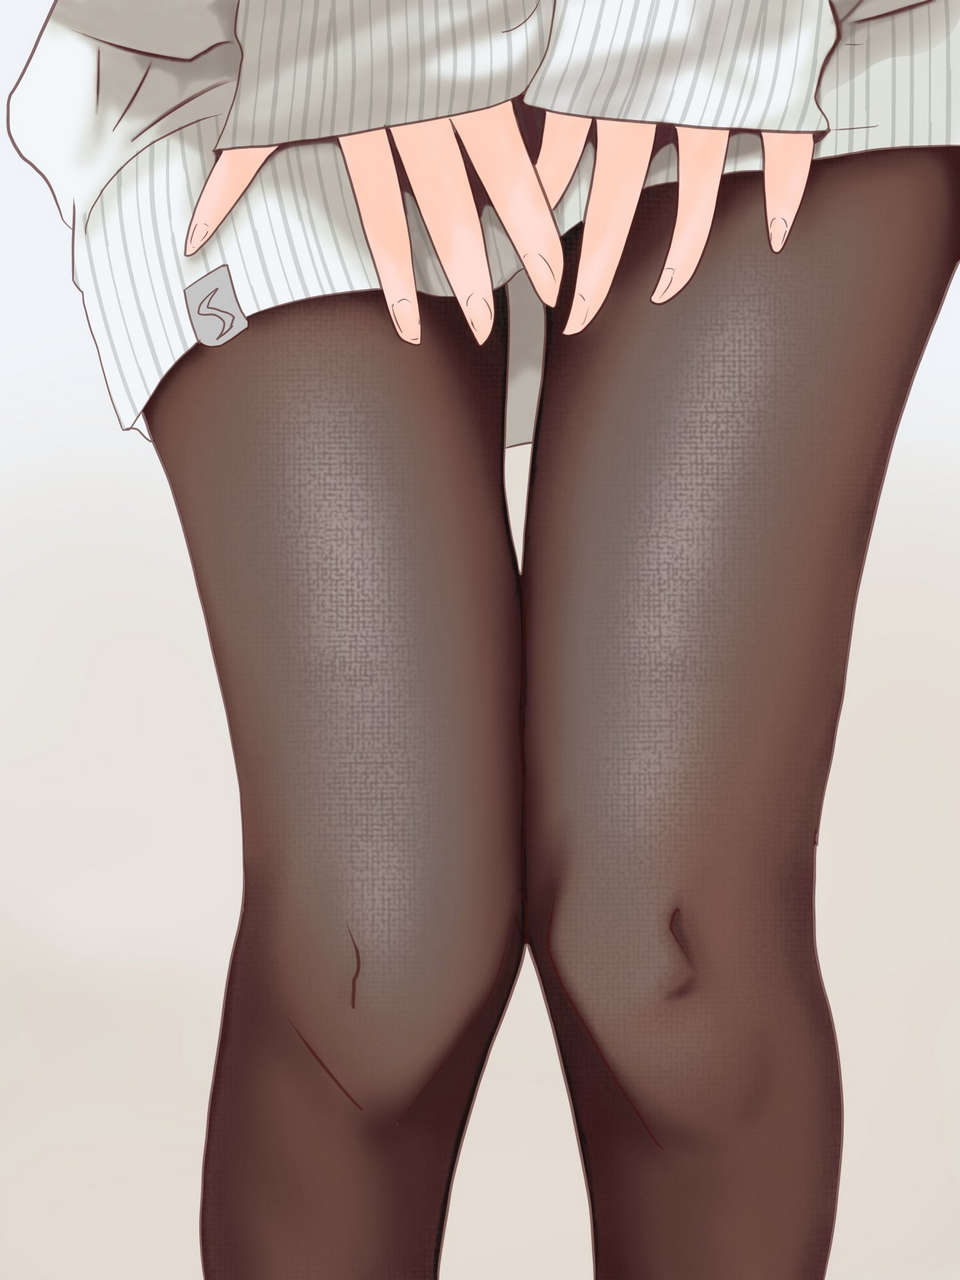 Sweater Tights Thighdeology